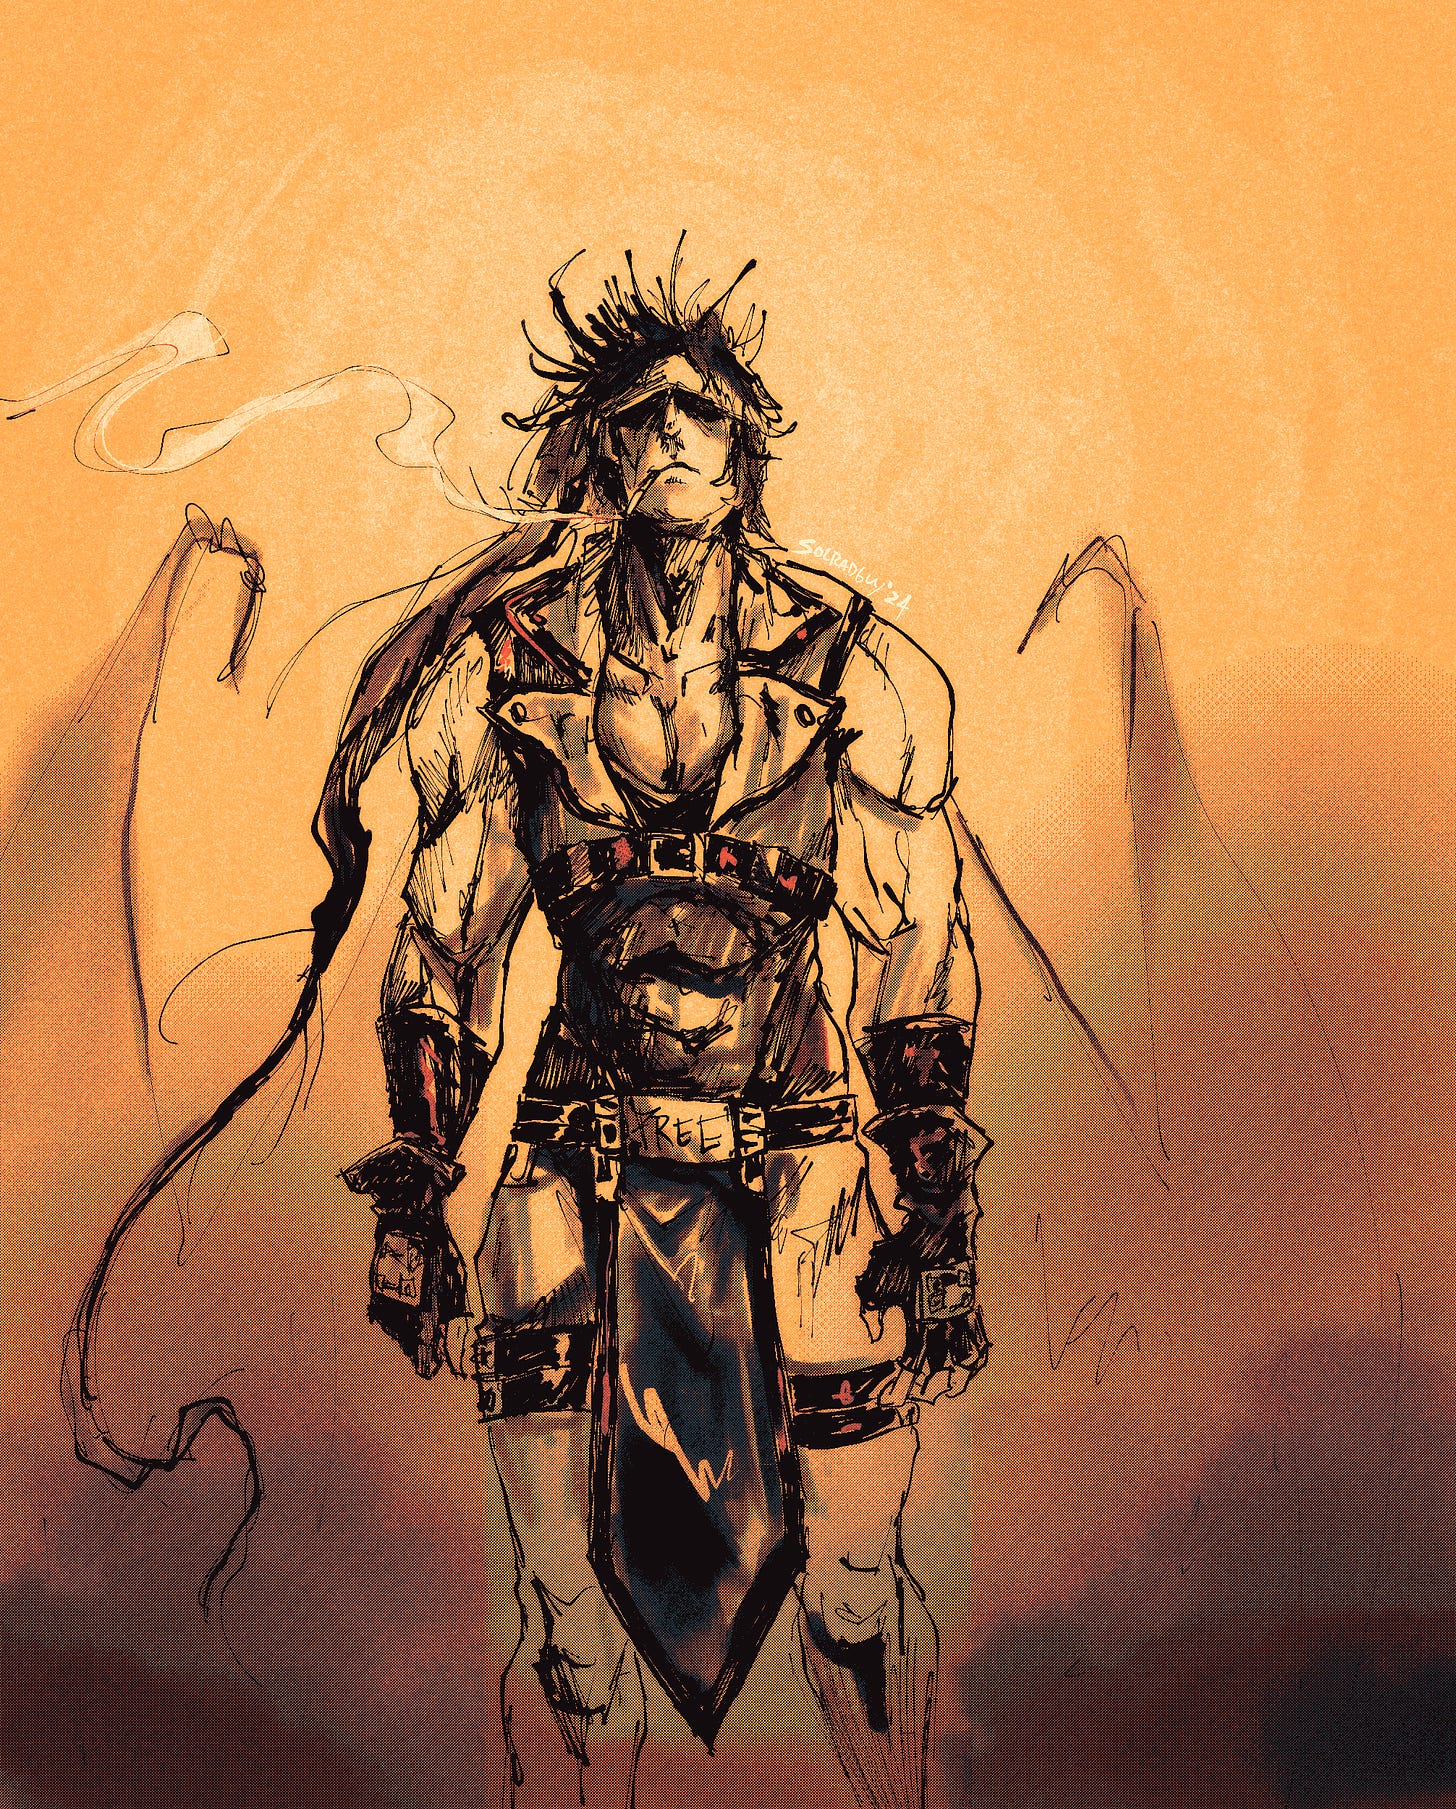 Sol rendered with loose lines and heavy texture with an overall orange, brown, and black composition. He's facing the viewer and looking upwards, cigarette in mouth. Wings behind him faintly emerge from the clouds or fog.